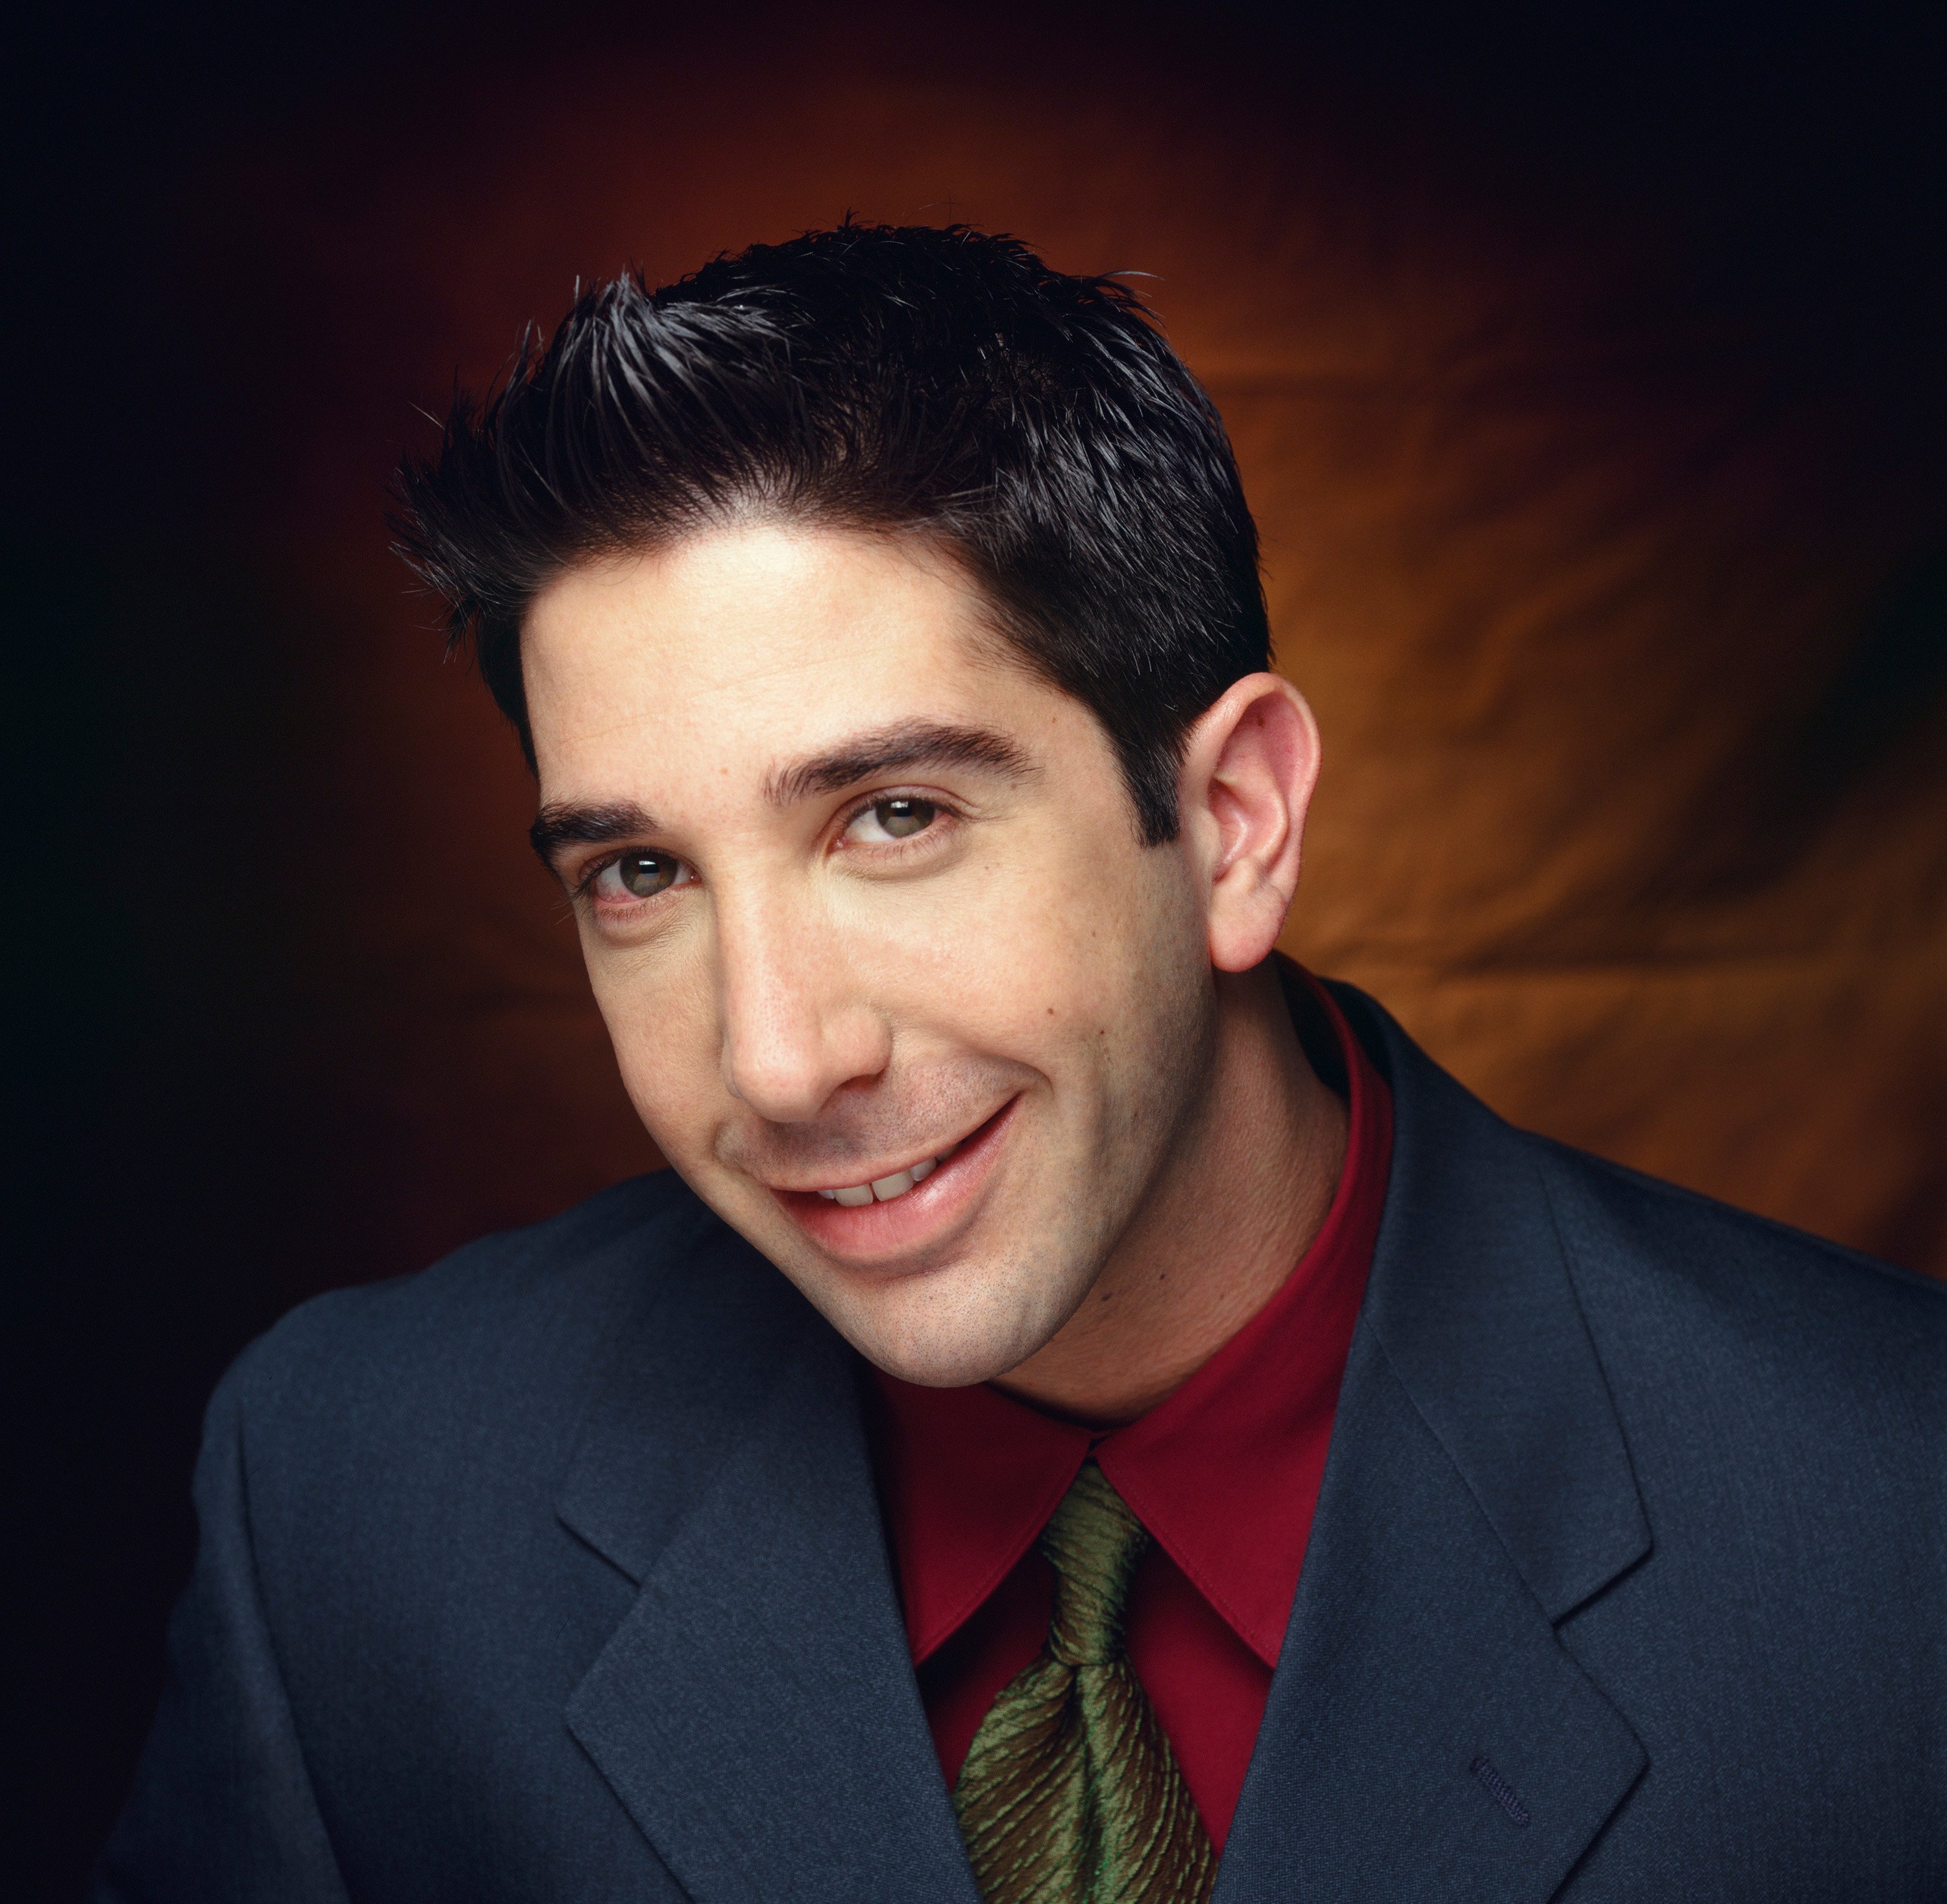 David Schwimmer as Ross Geller in a promotional photo for 'Friends'